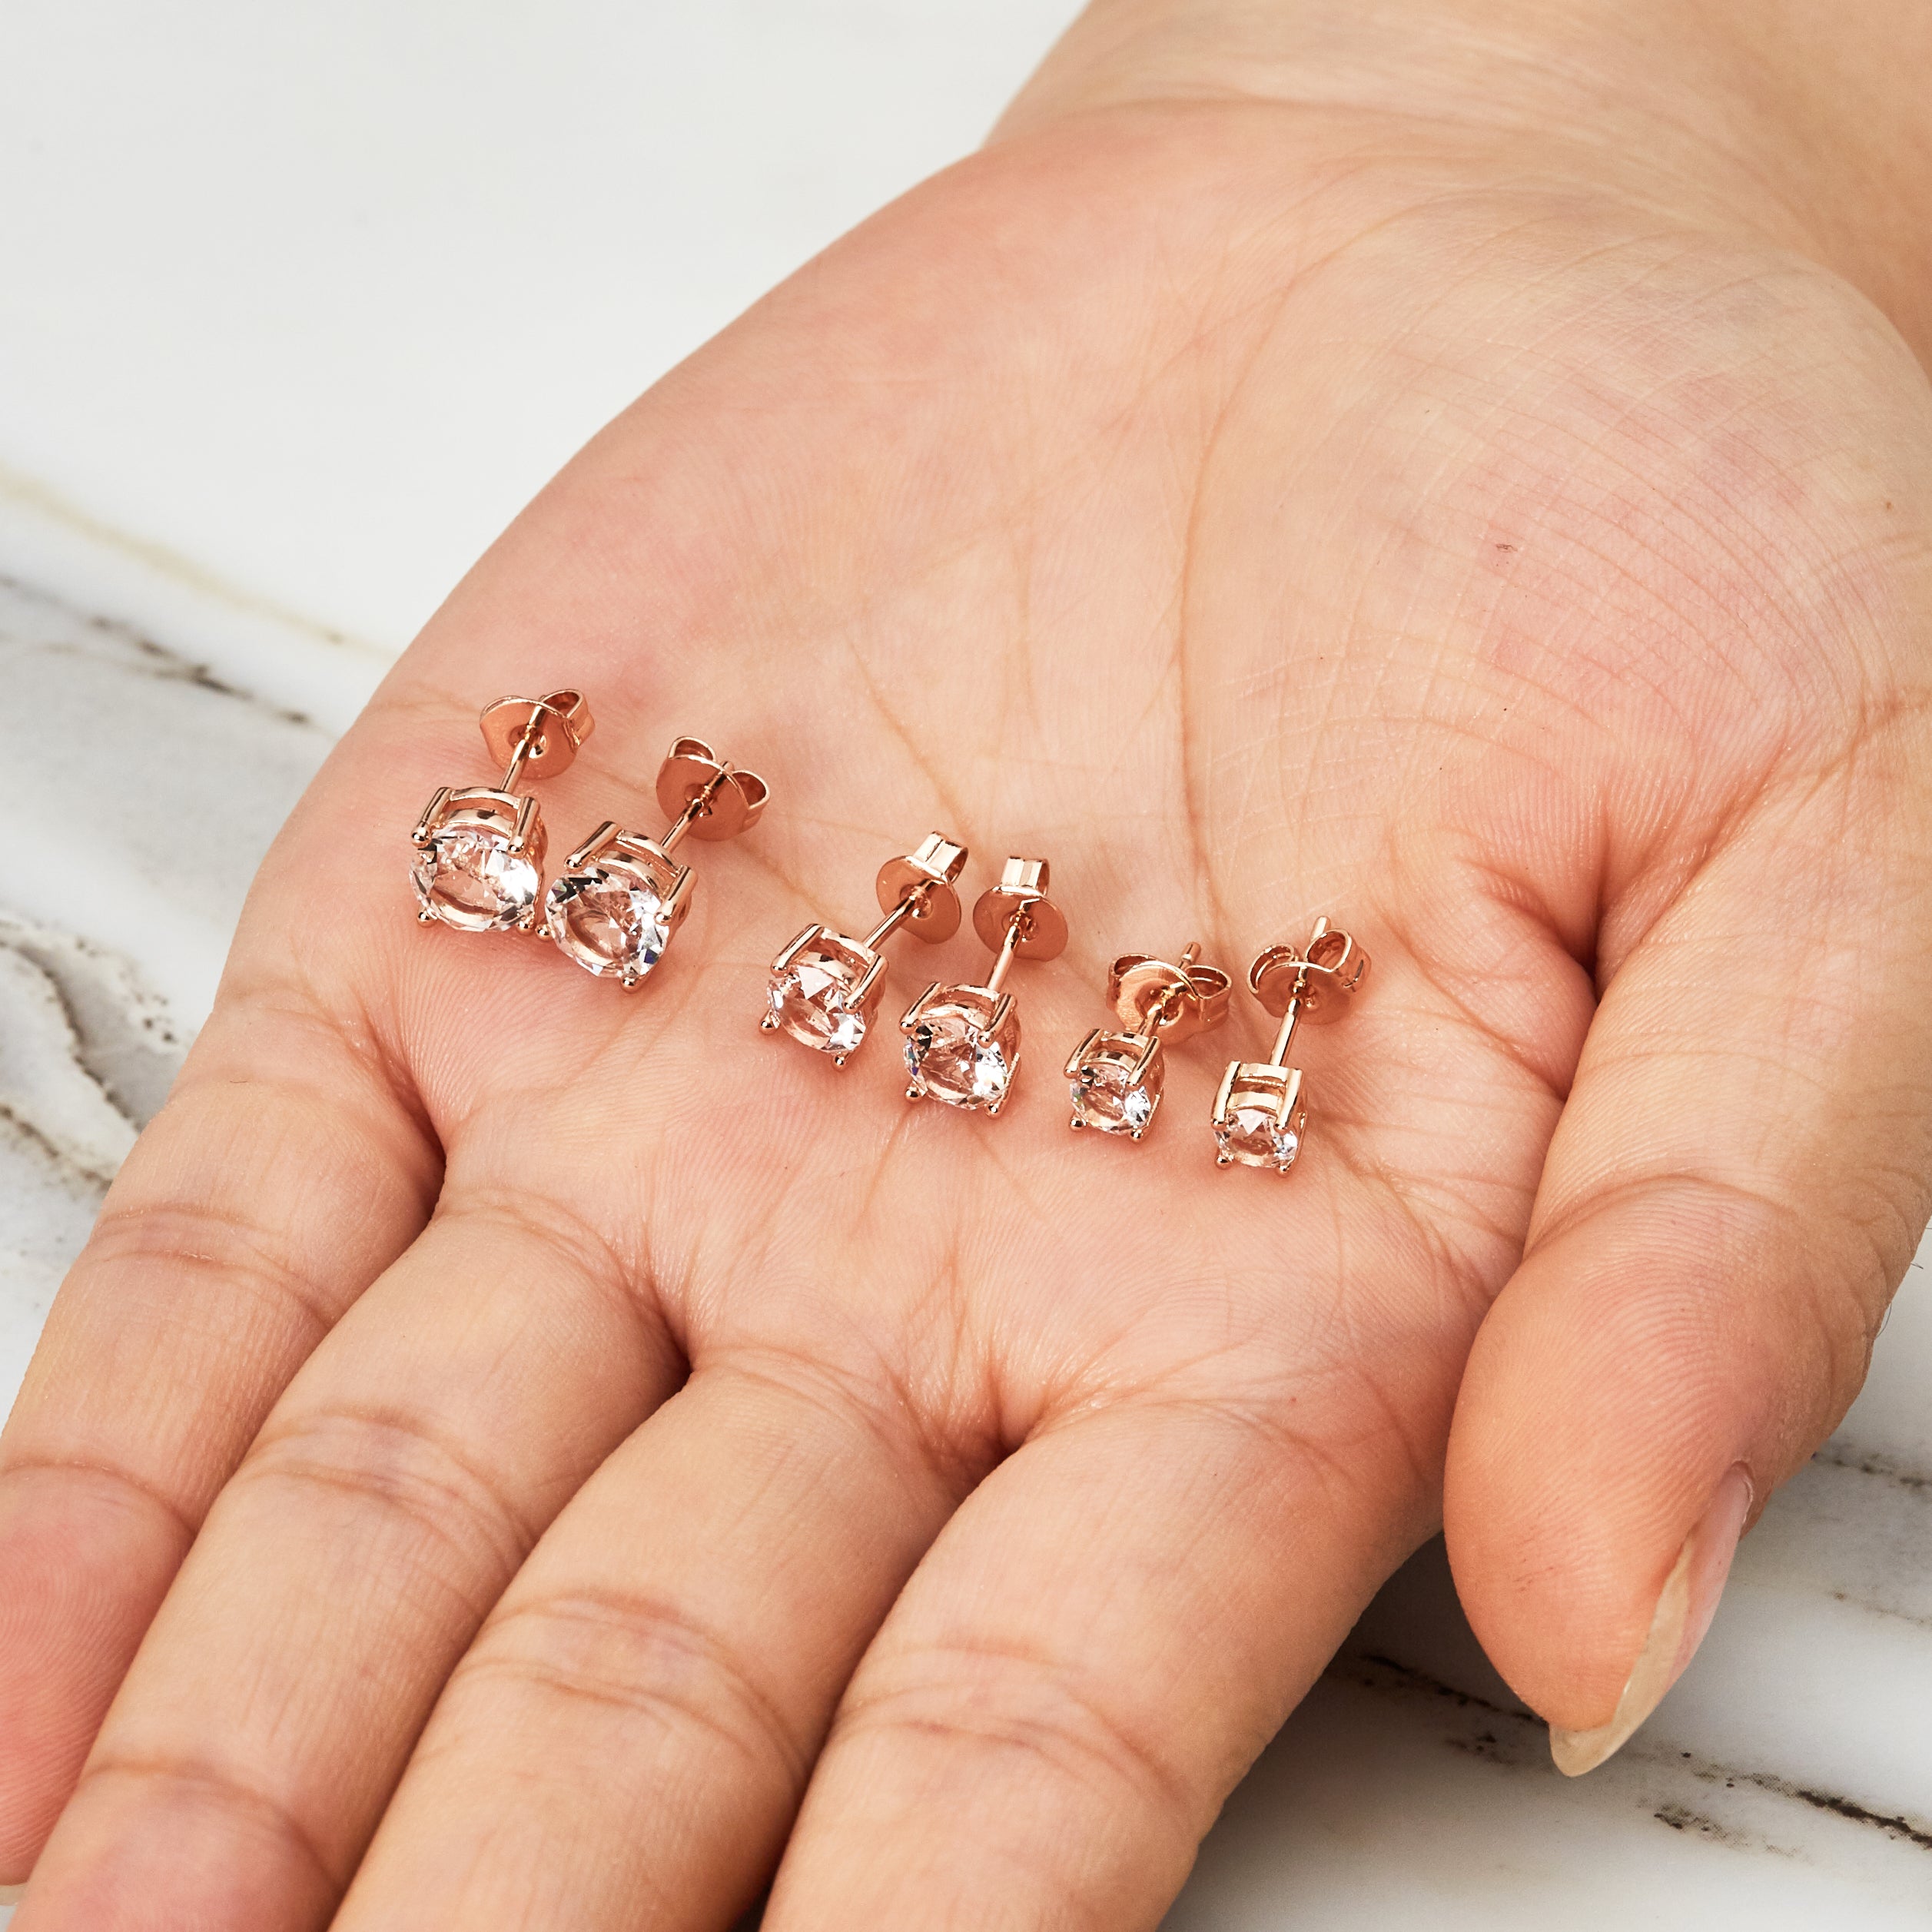 Three Pack of Rose Gold Plated 4mm, 5mm & 6mm Earrings Created with Zircondia® Crystals